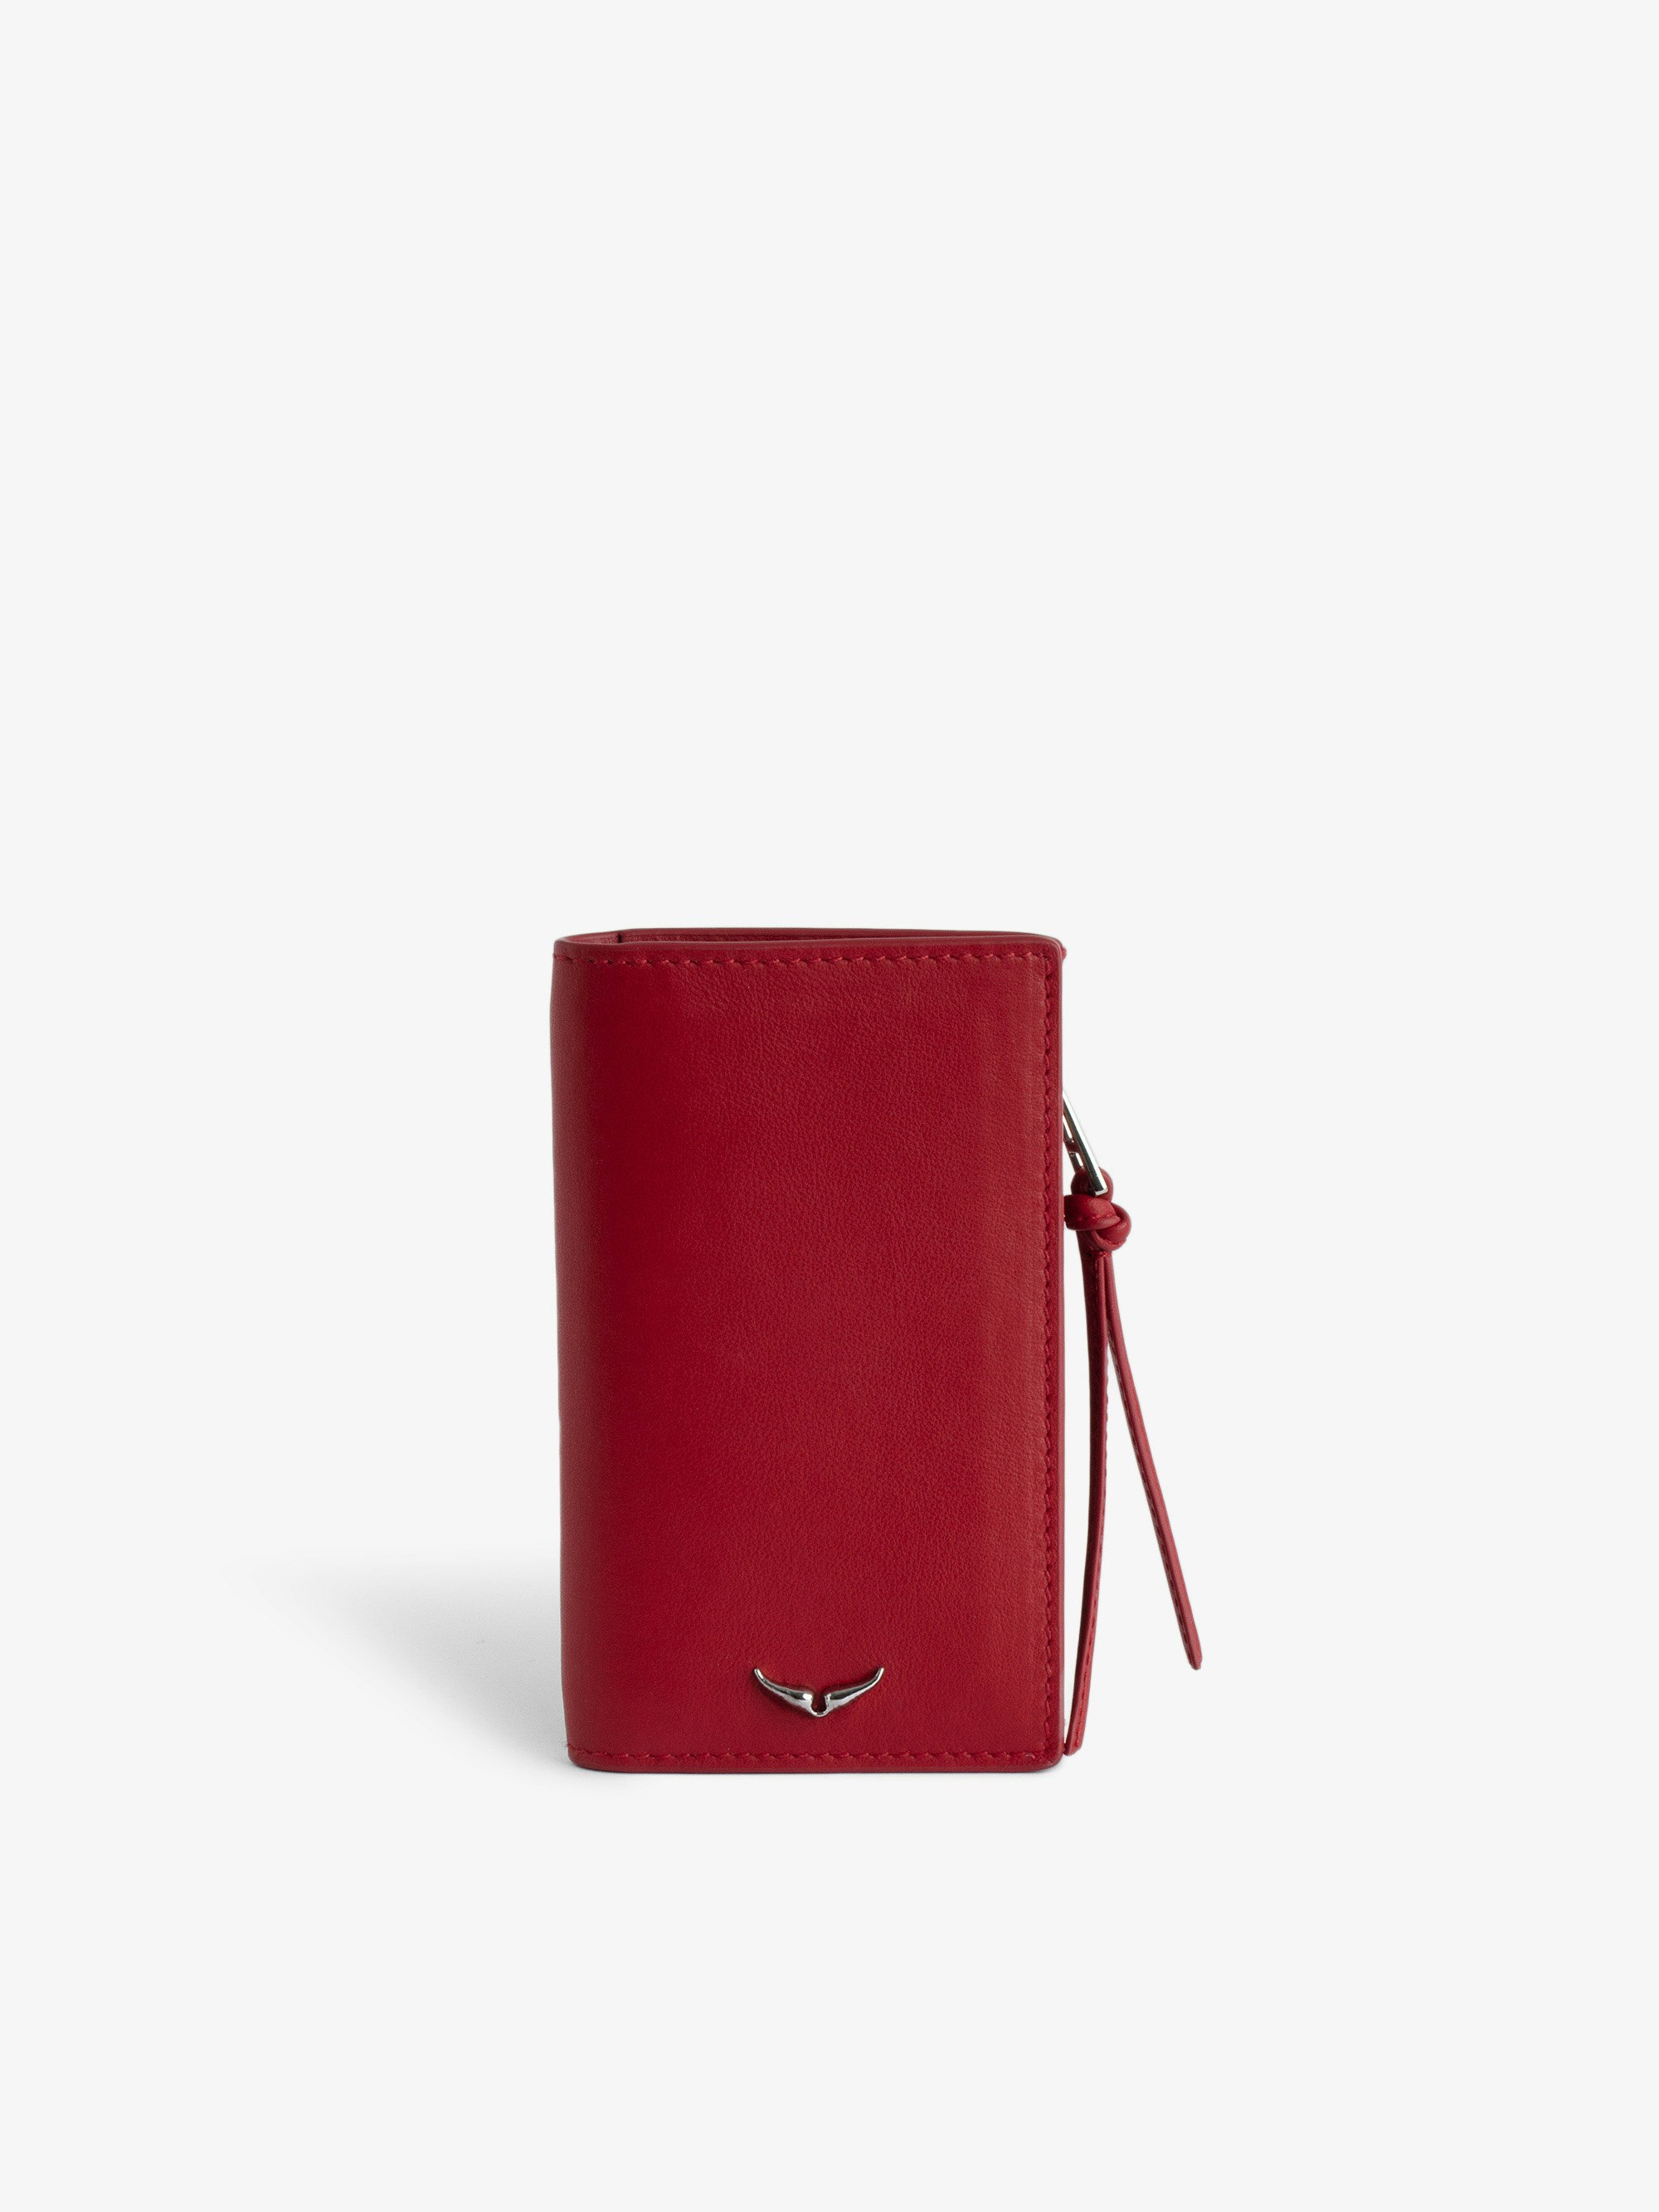 Compact Eternal Card Holder - Smooth red leather card holder.